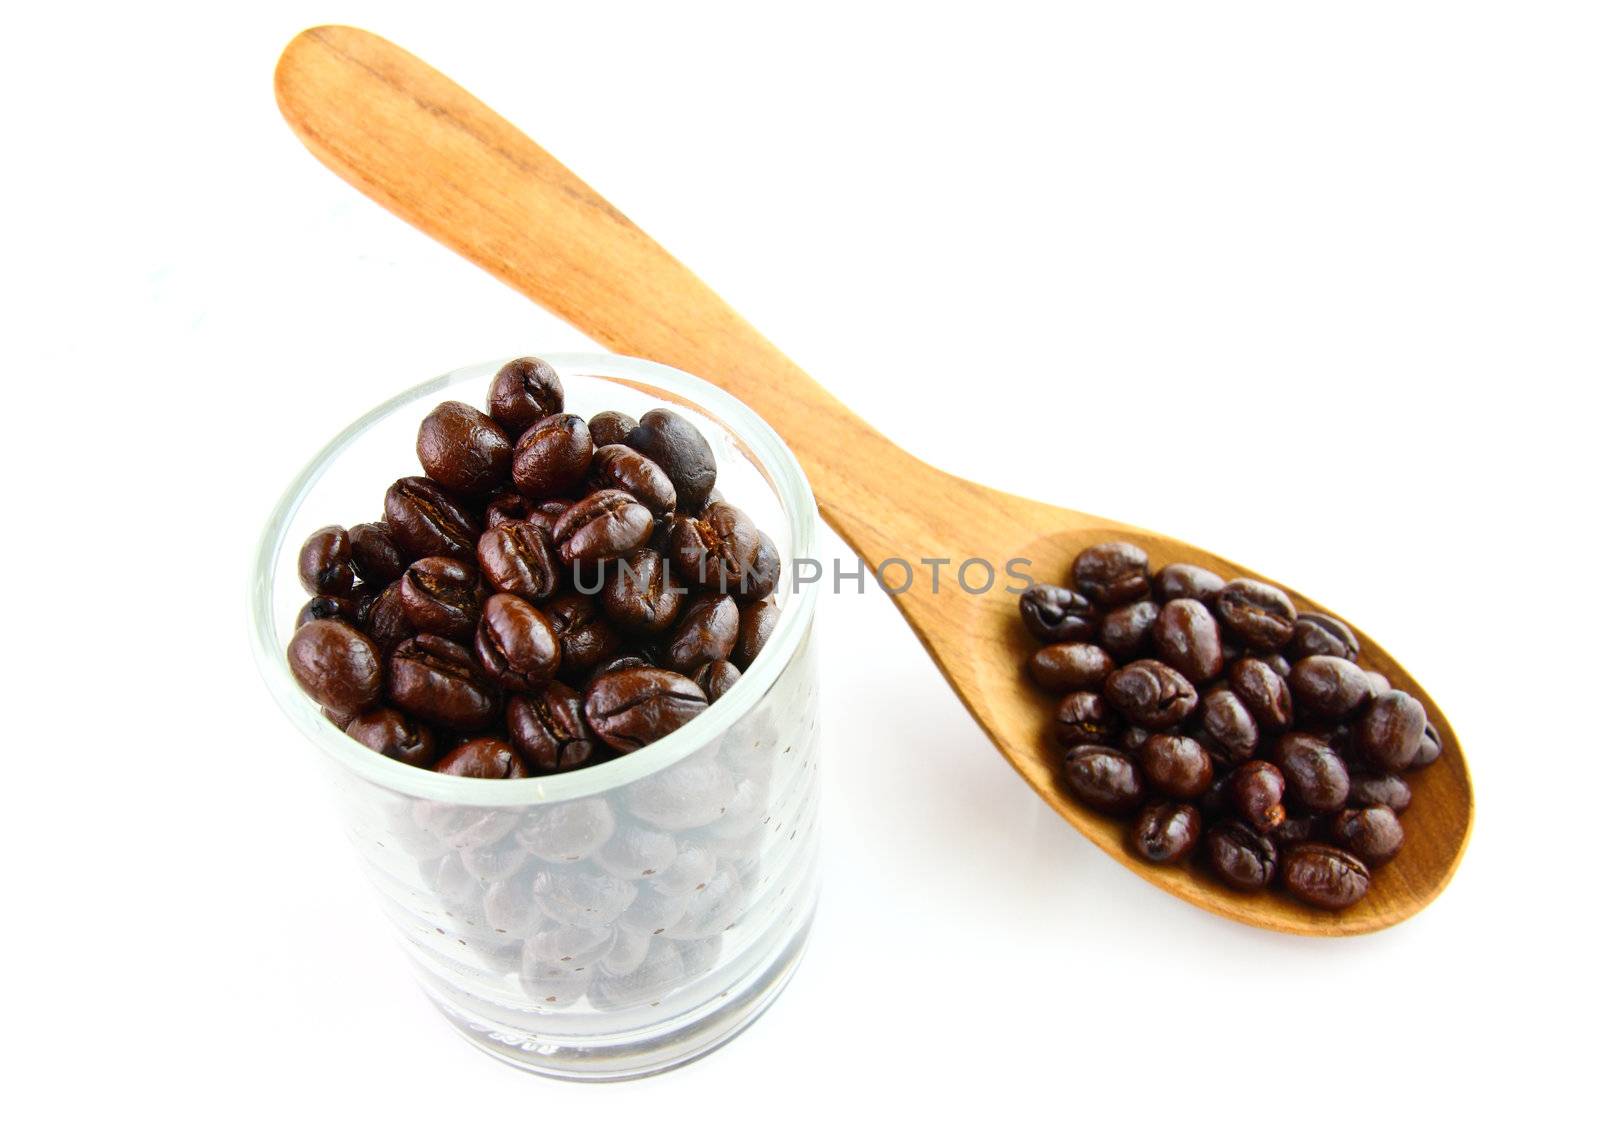 Coffee beans in a glass with wooden spoon on white background